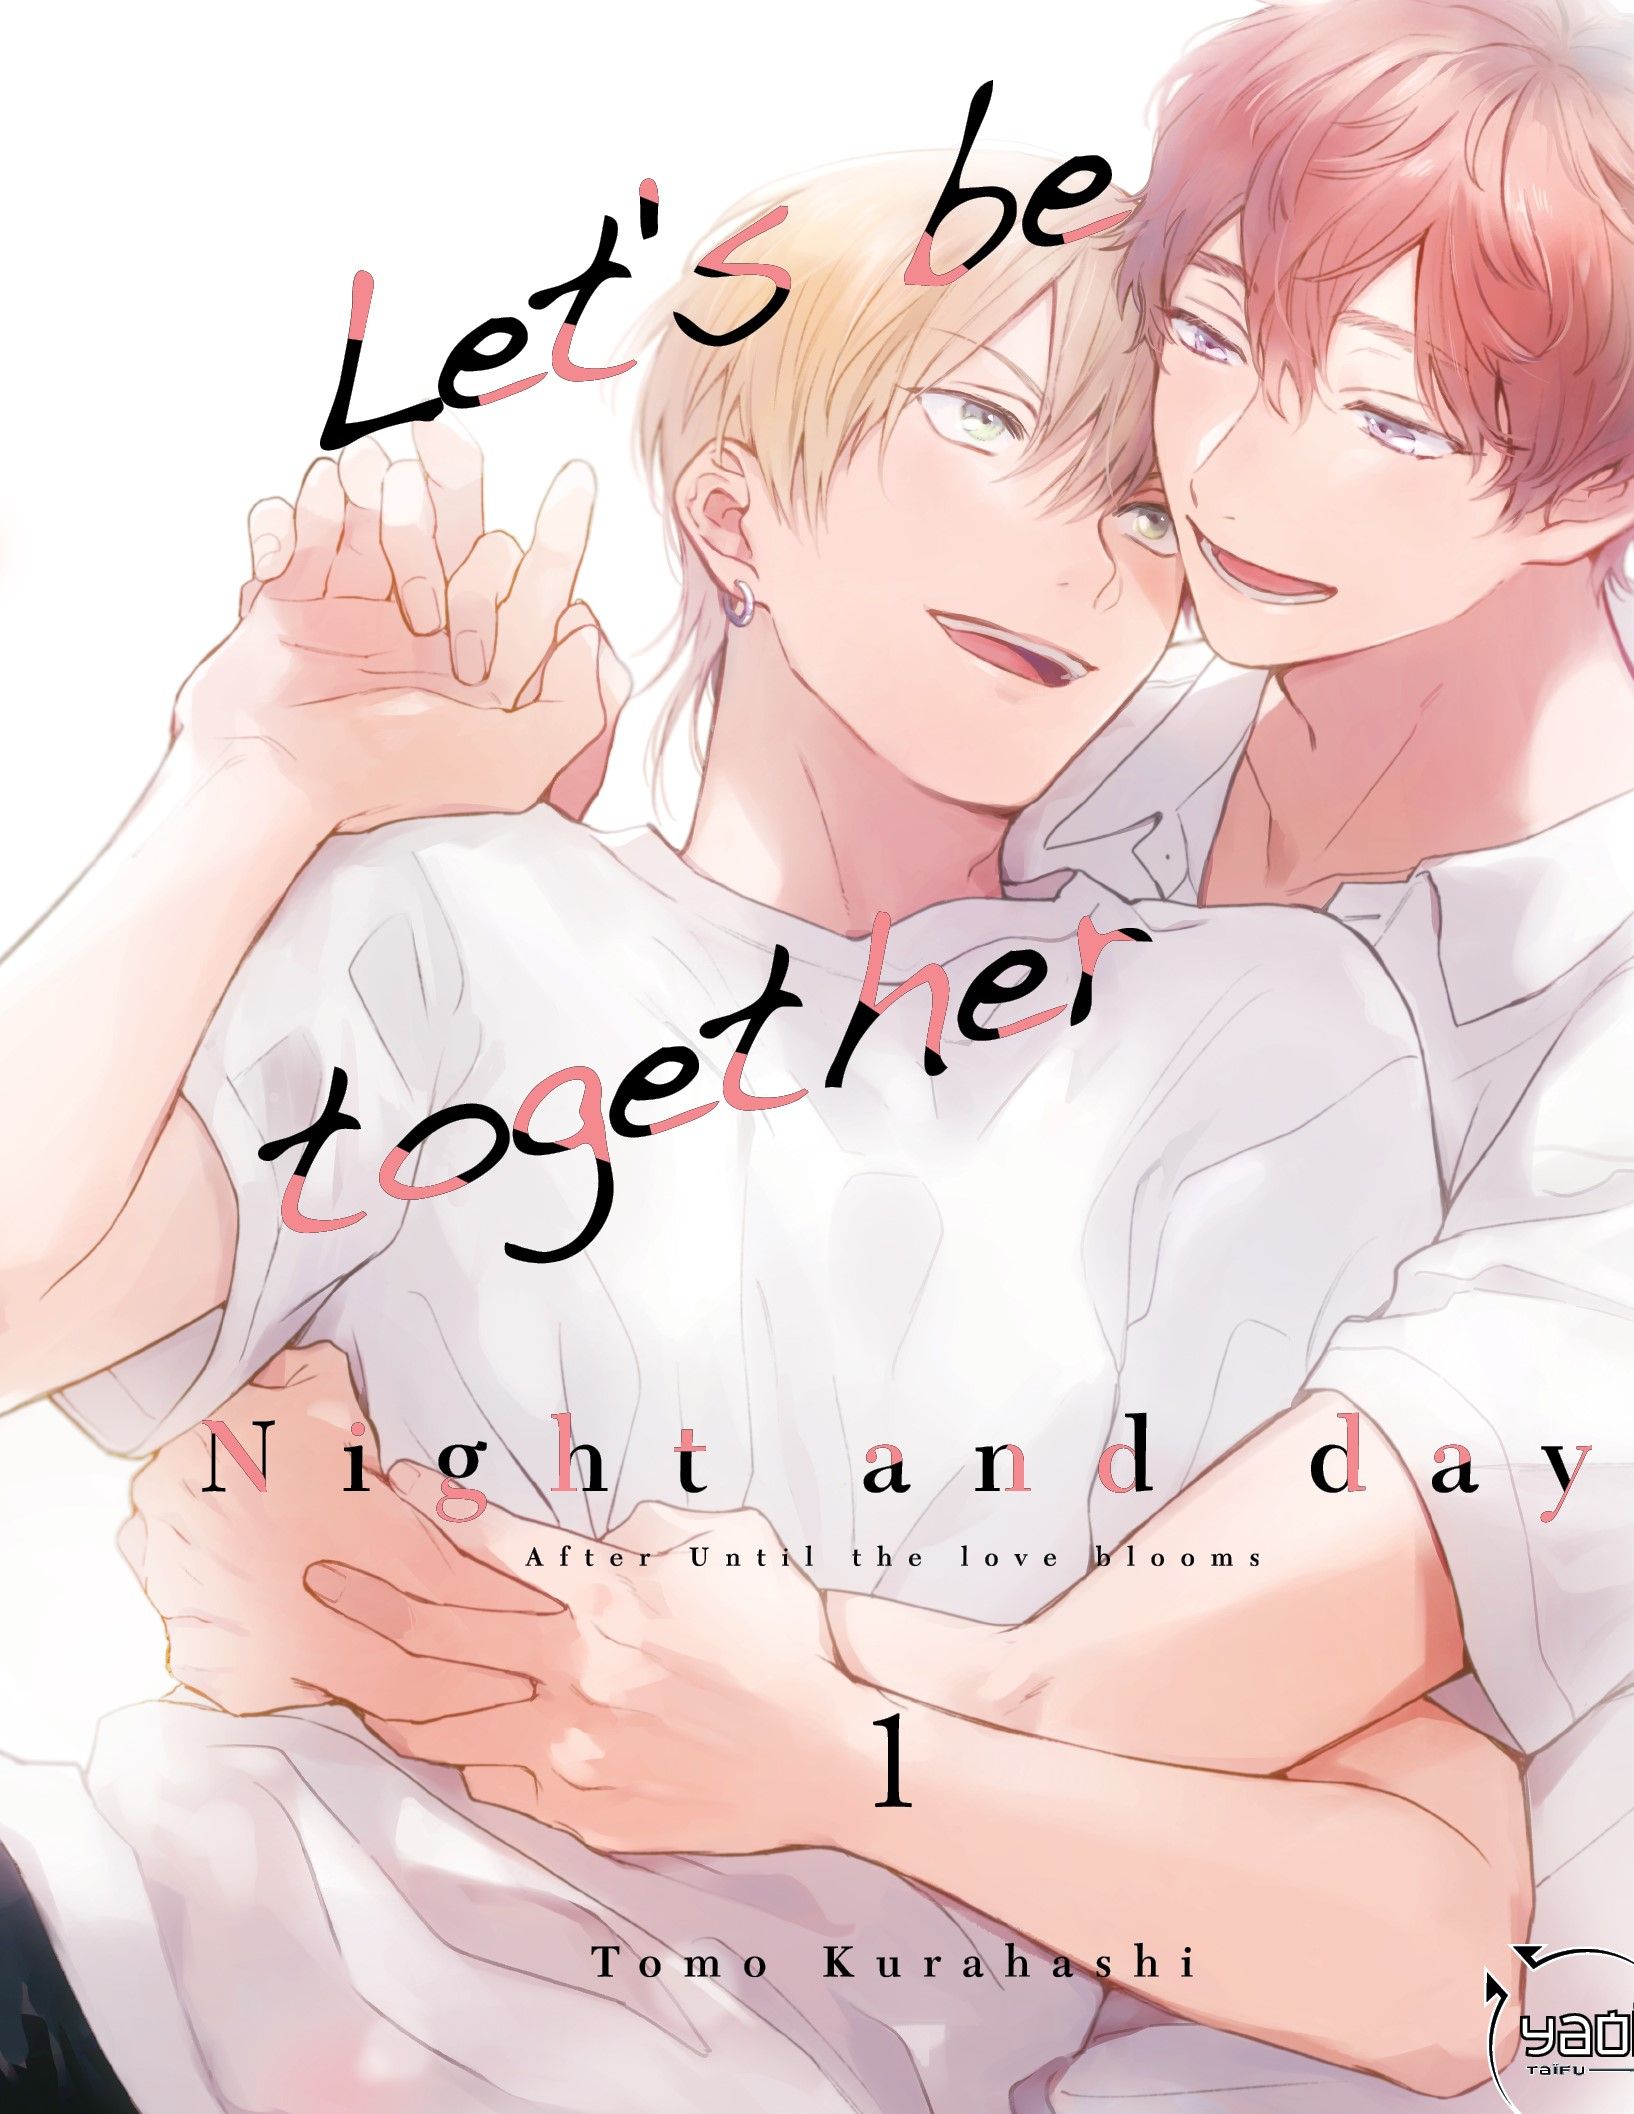 Let’s be together Night and day – tome 1